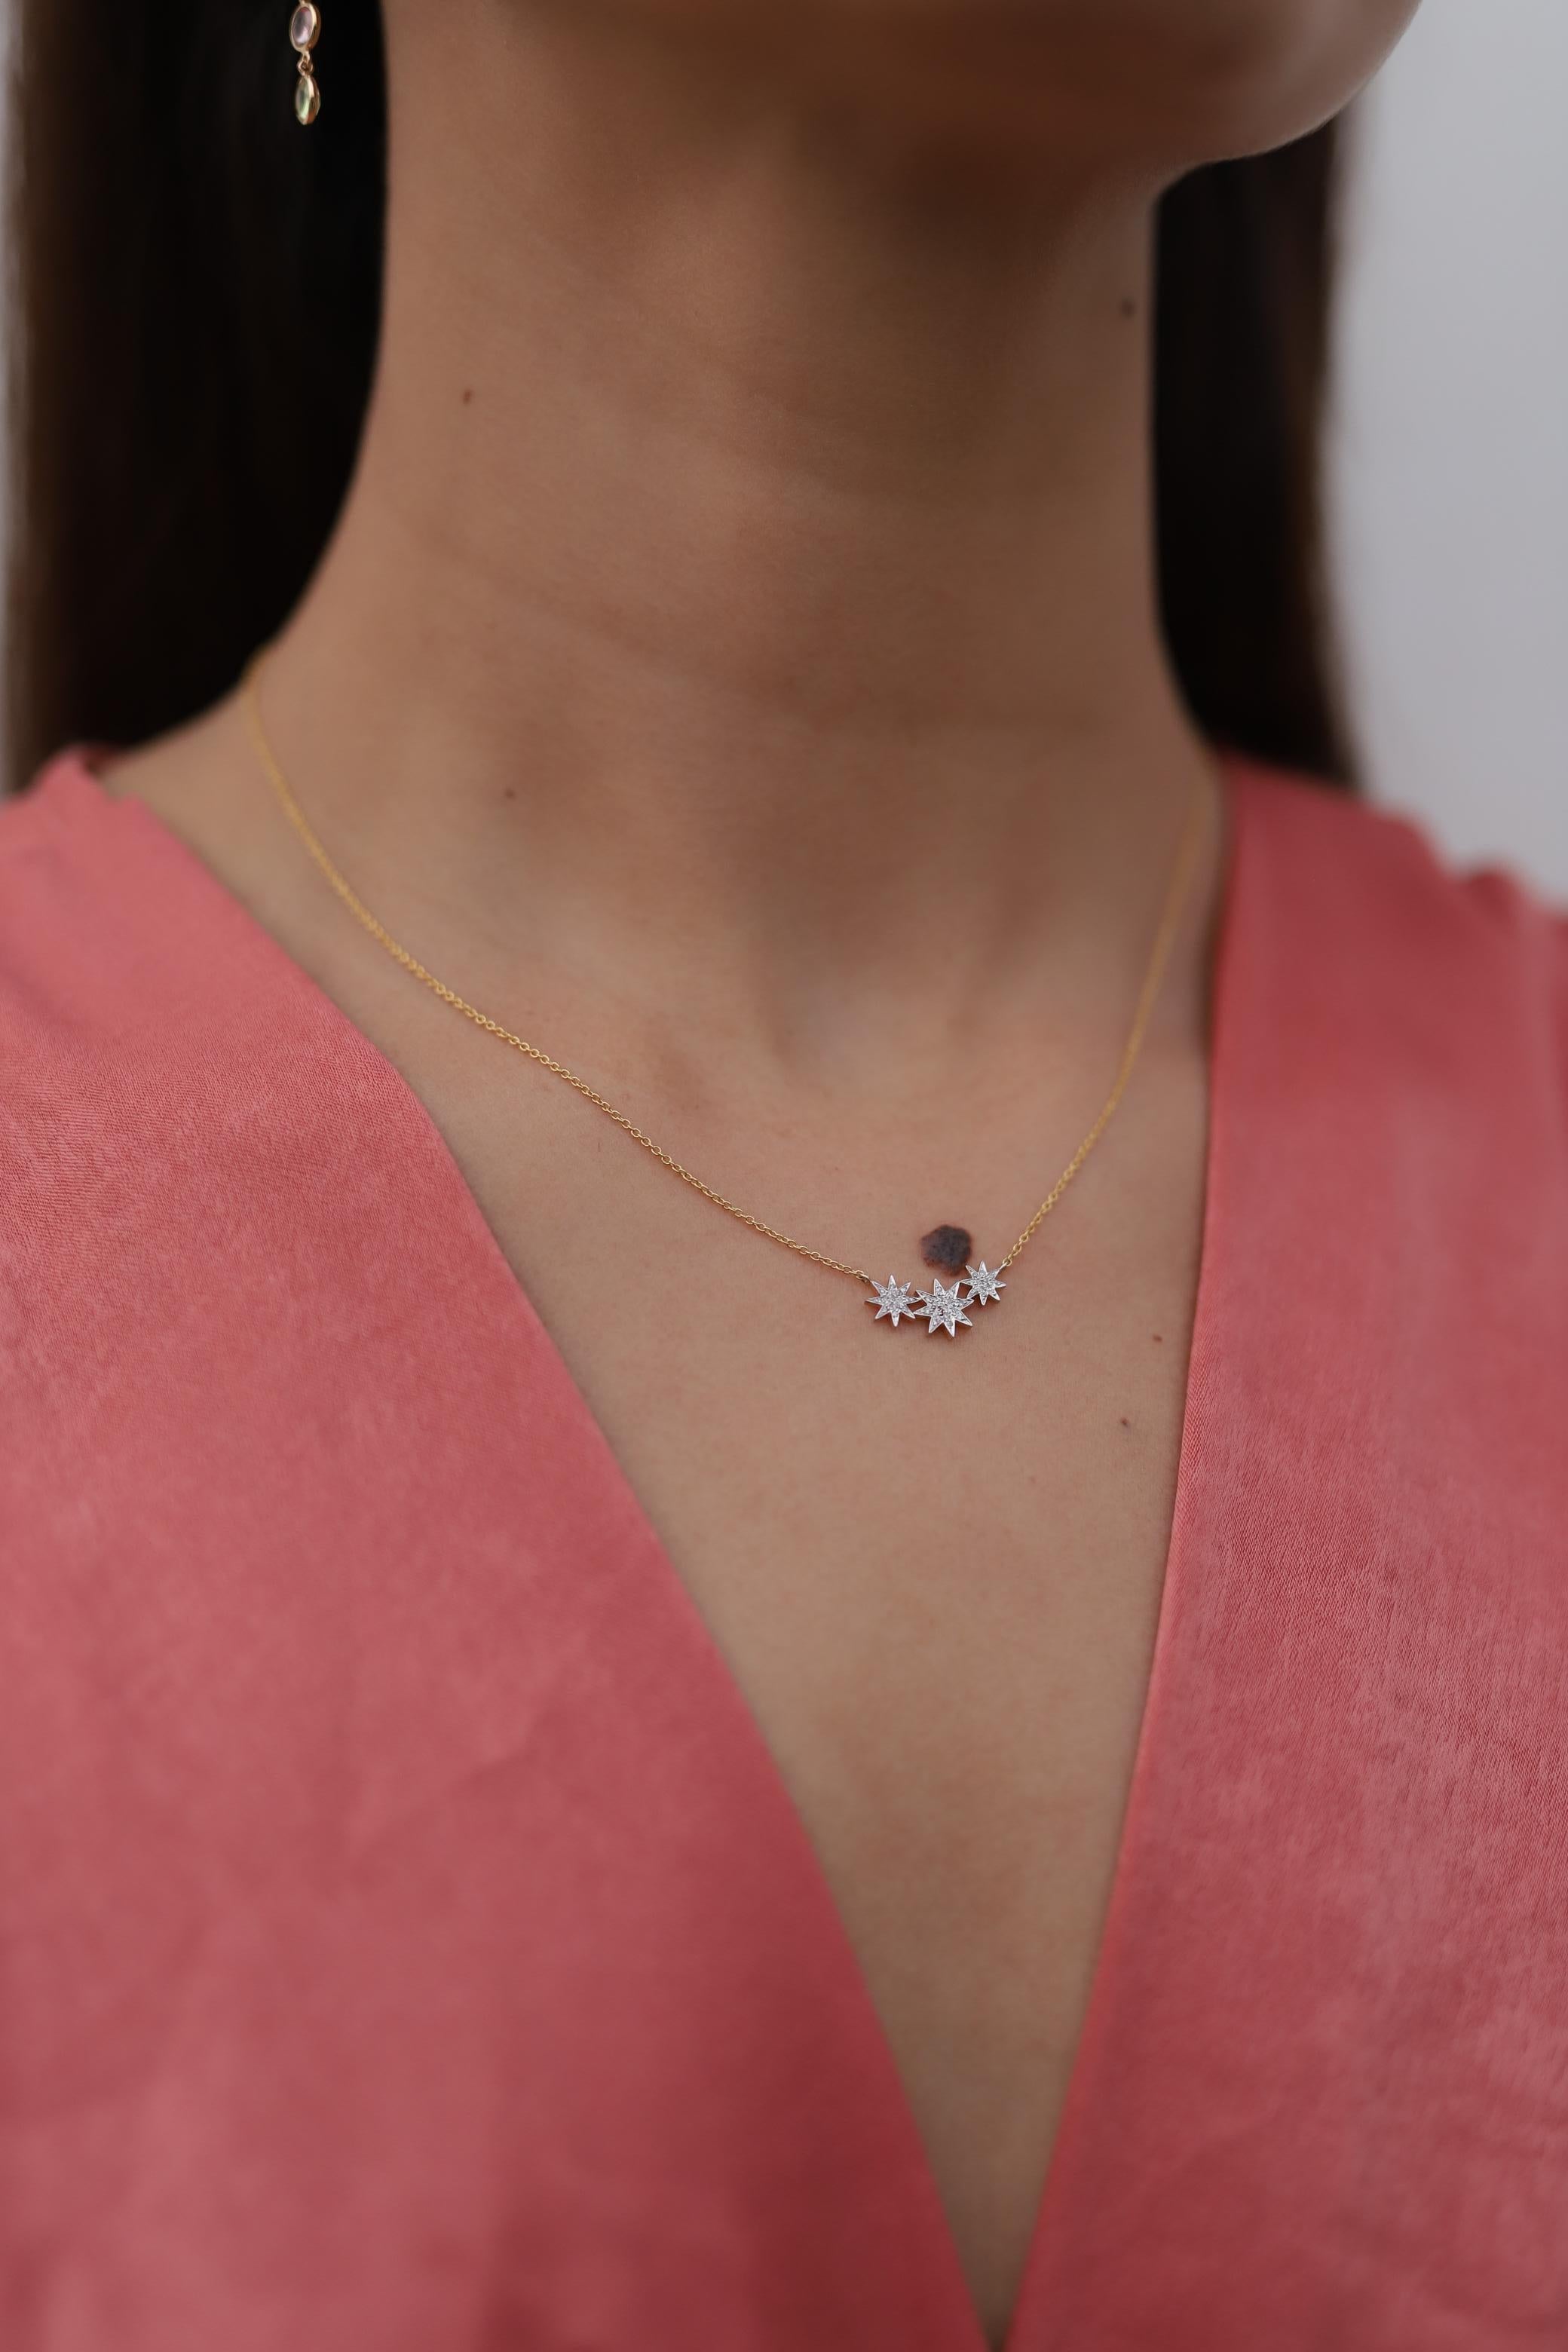 3 Star Diamond Necklace in 18K Gold studded with round cut diamond. This stunning piece of jewelry instantly elevates a casual look or dressy outfit. 
April birthstone diamond brings love, fame, success and prosperity.
Designed with diamonds studded